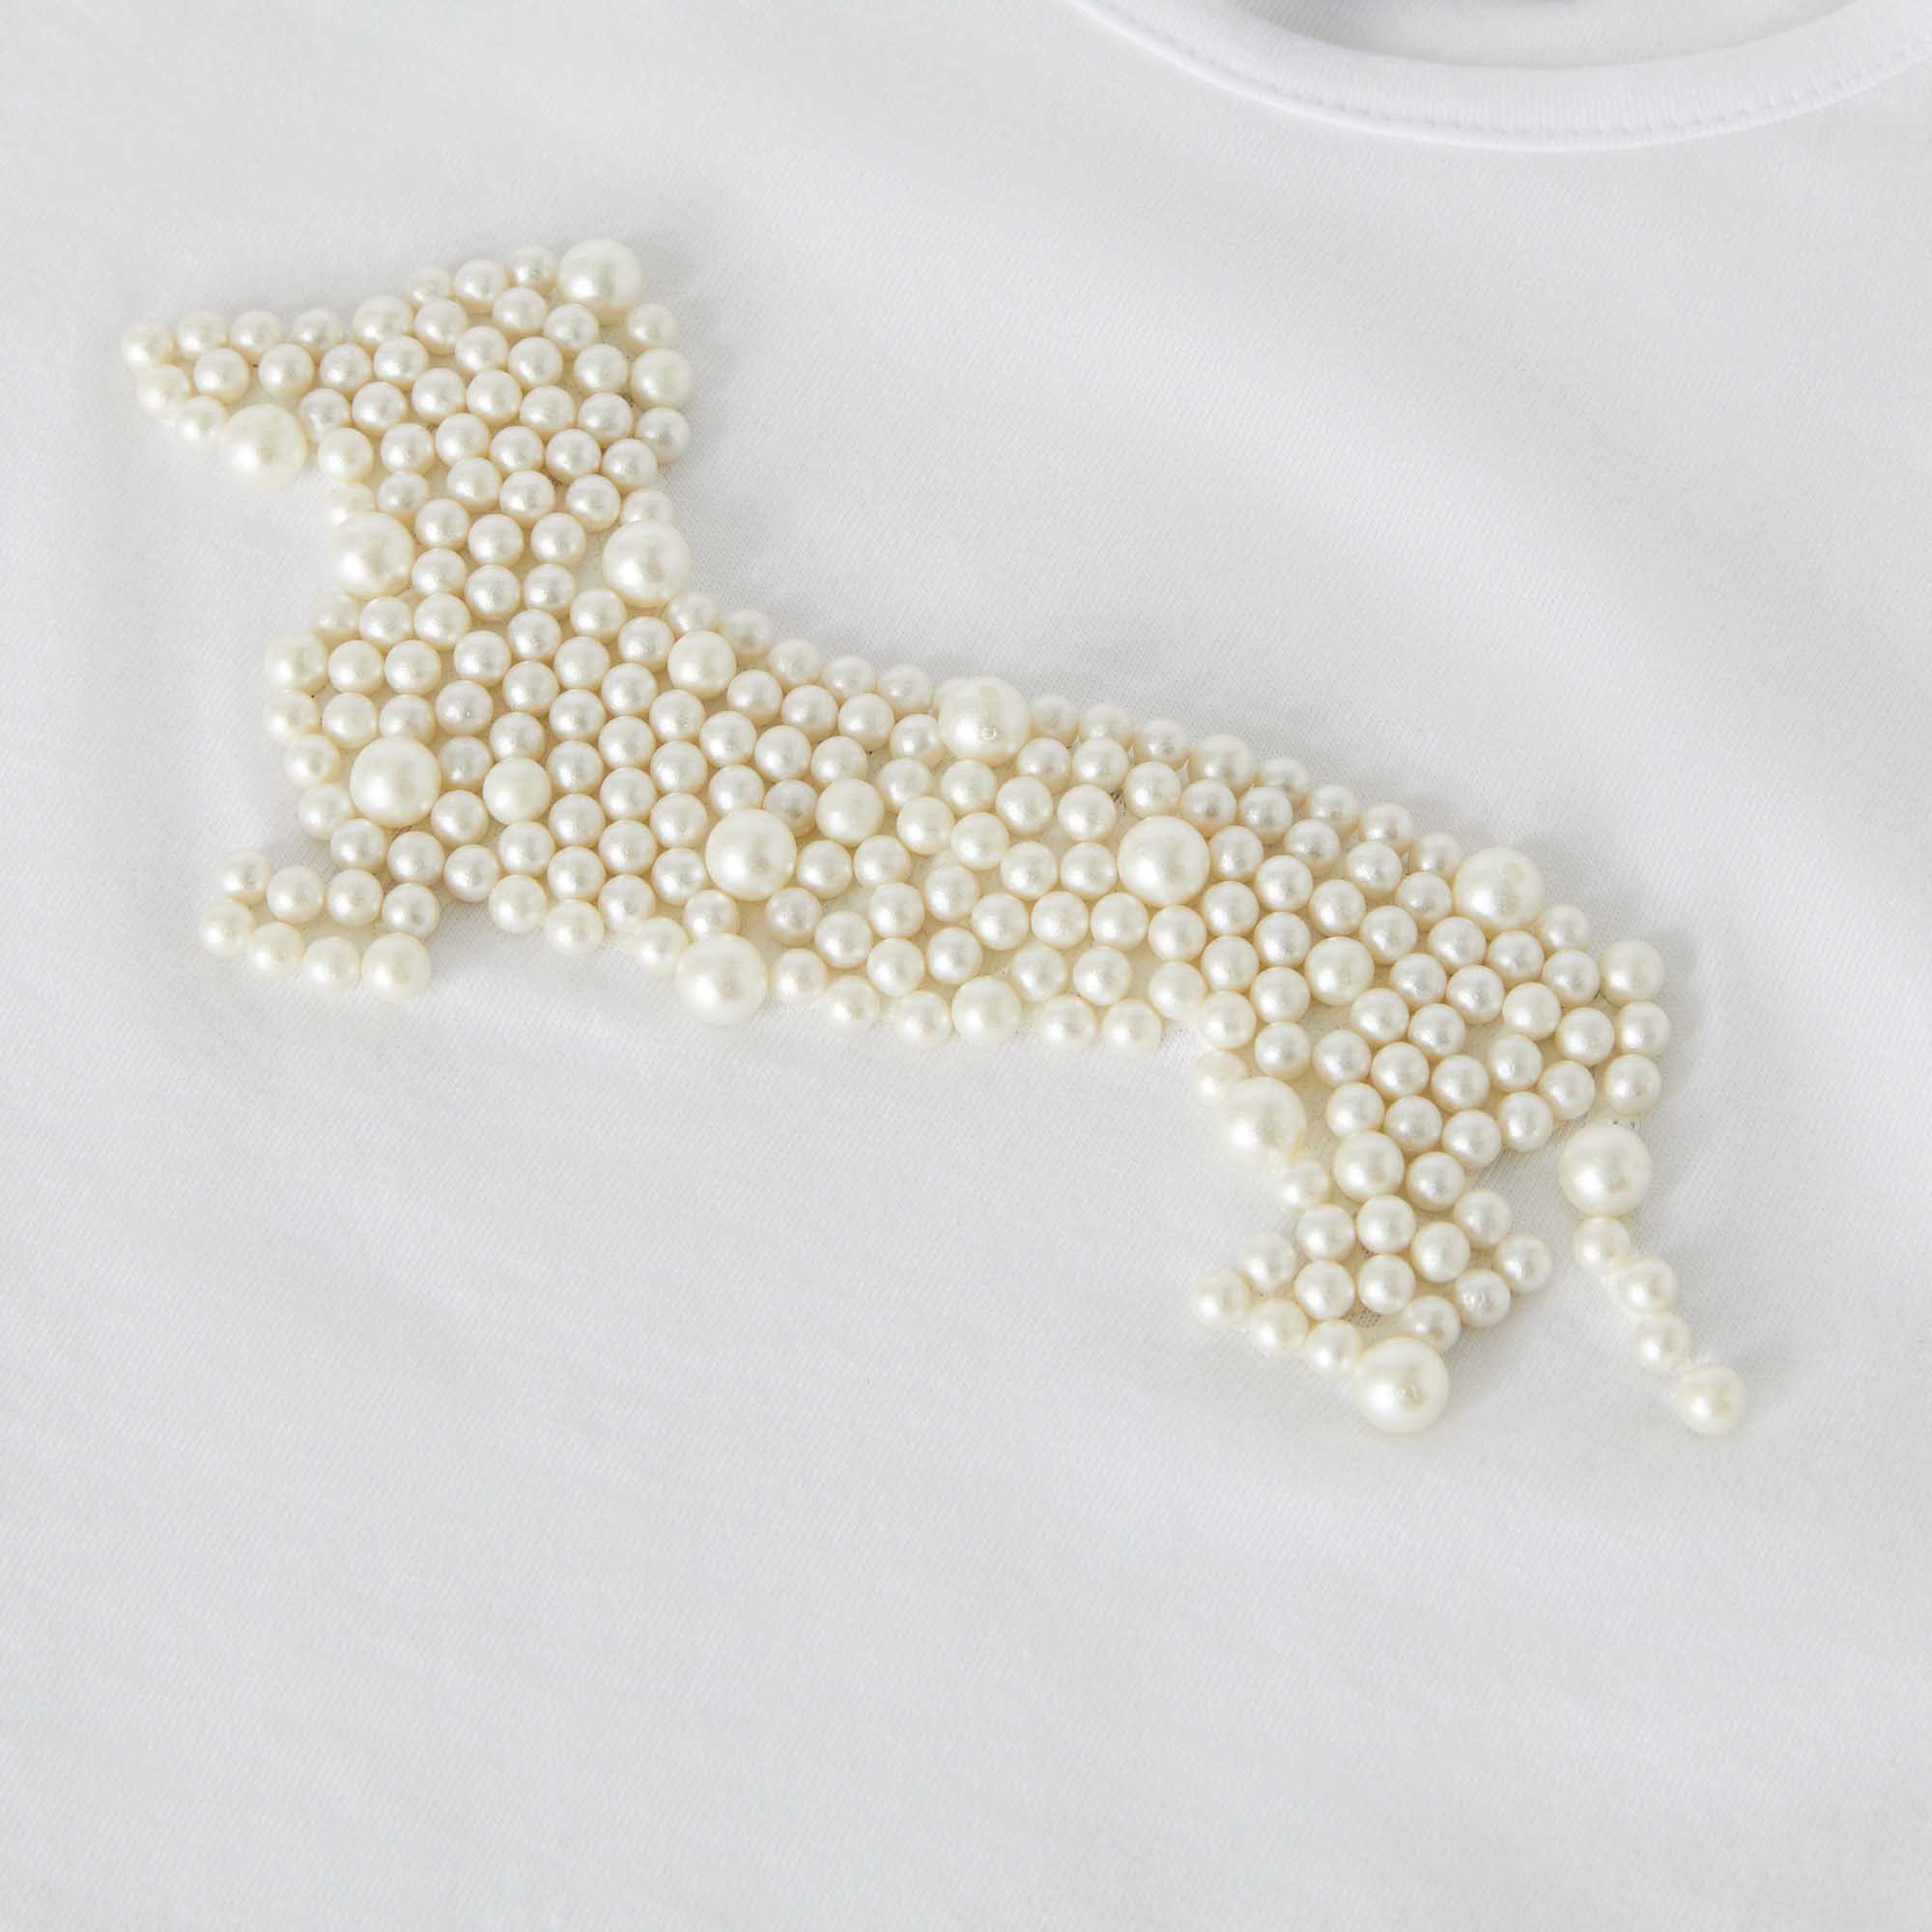 T-shirt decorated with pearls, White, large image number 2